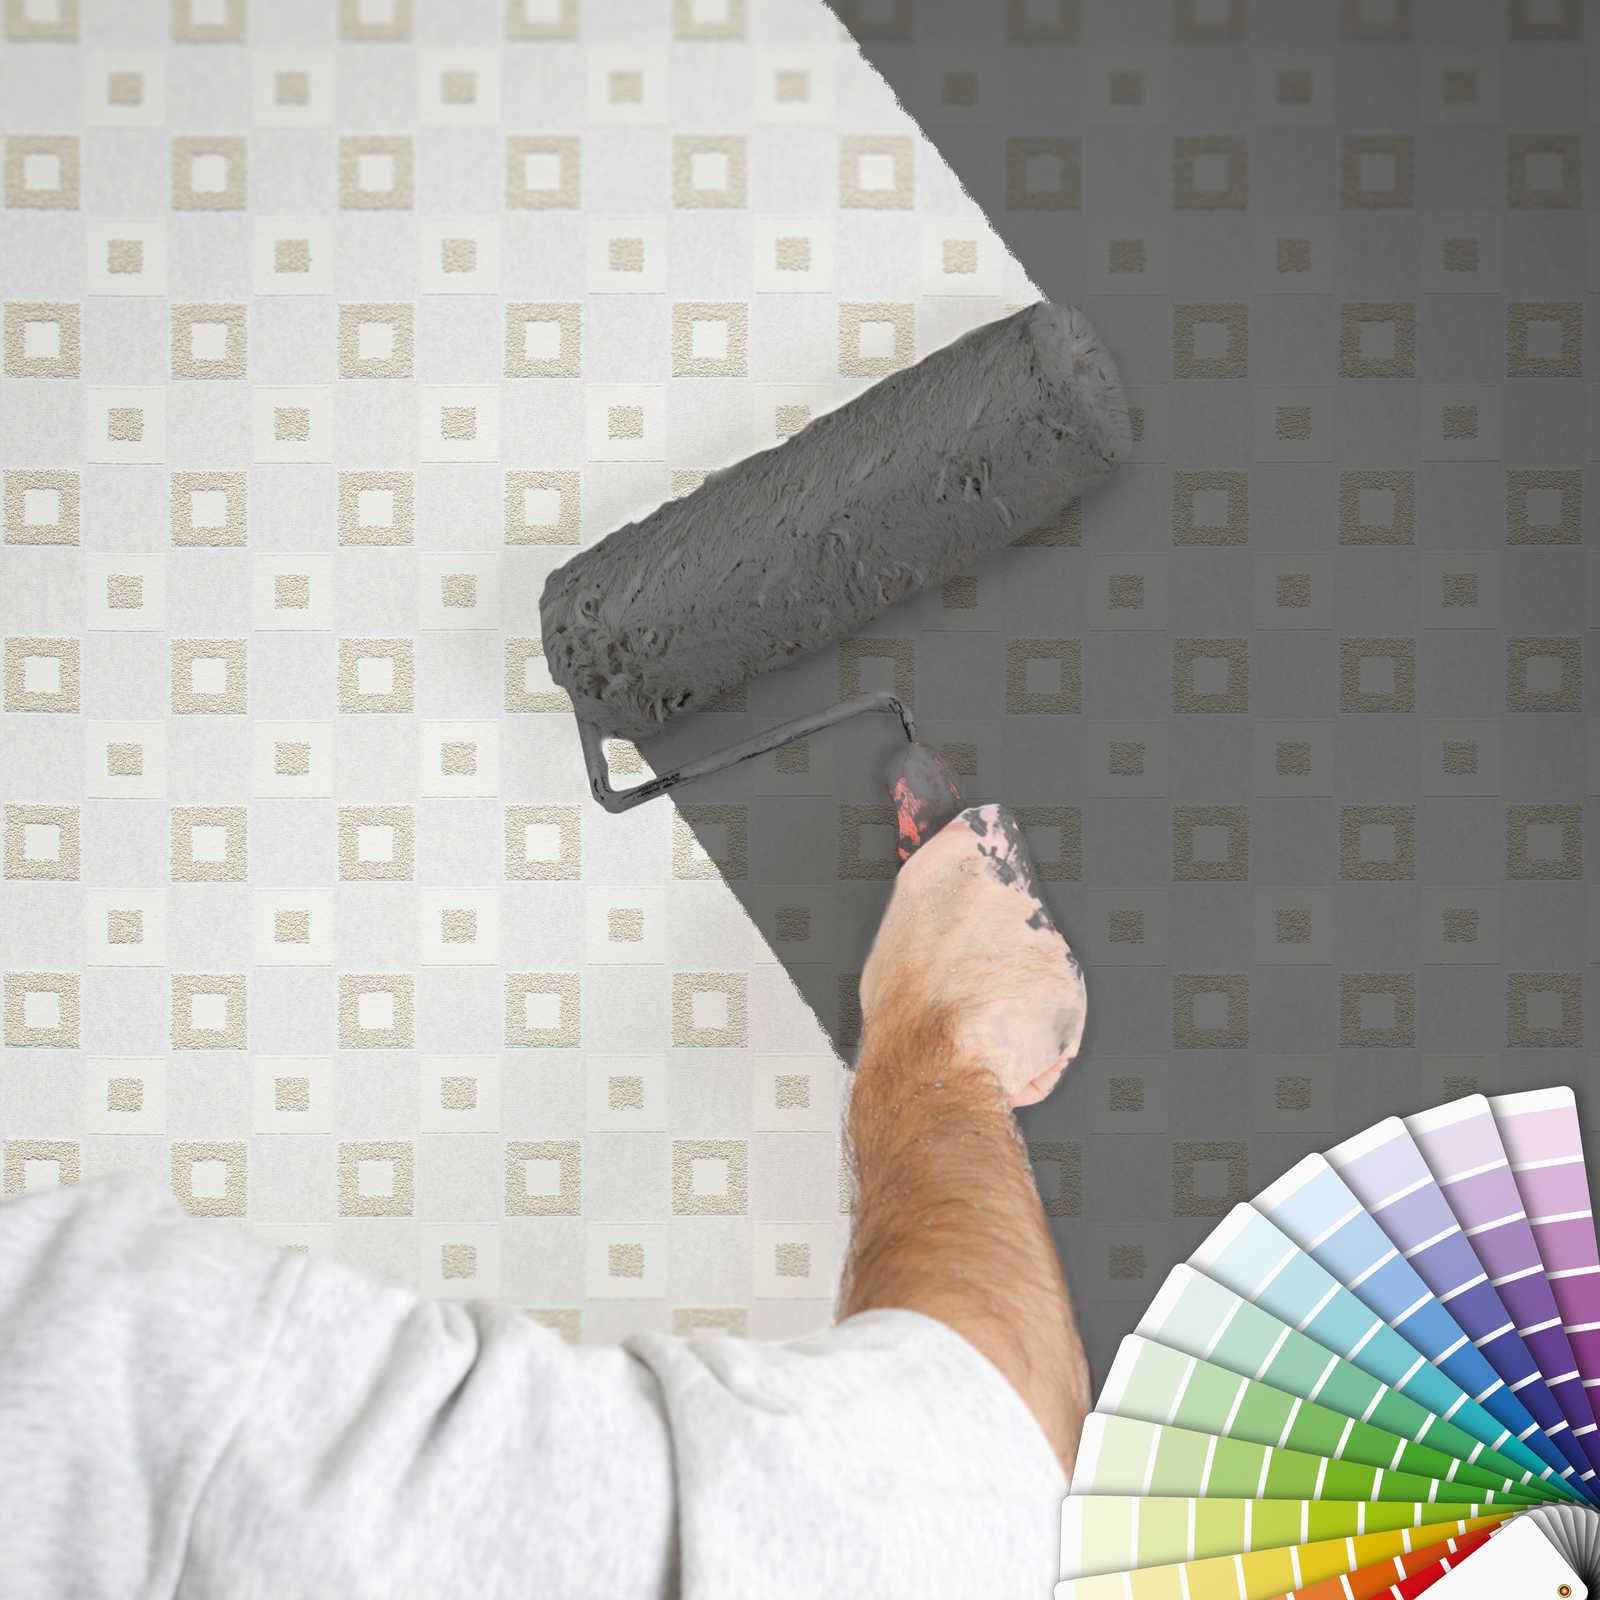             Paintable wallpaper with check pattern with 3D structure
        